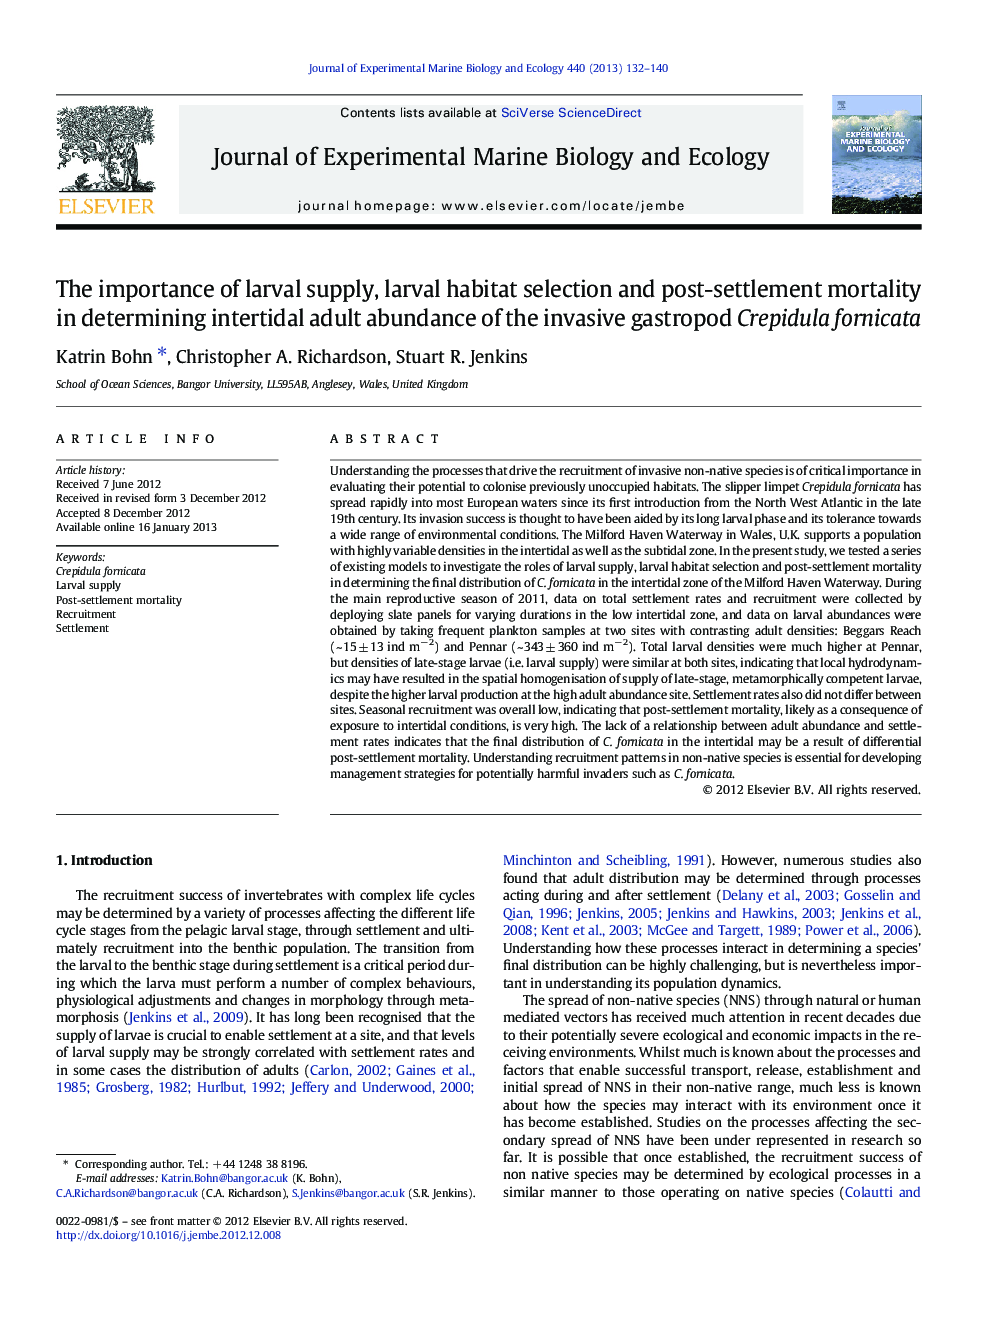 The importance of larval supply, larval habitat selection and post-settlement mortality in determining intertidal adult abundance of the invasive gastropod Crepidula fornicata